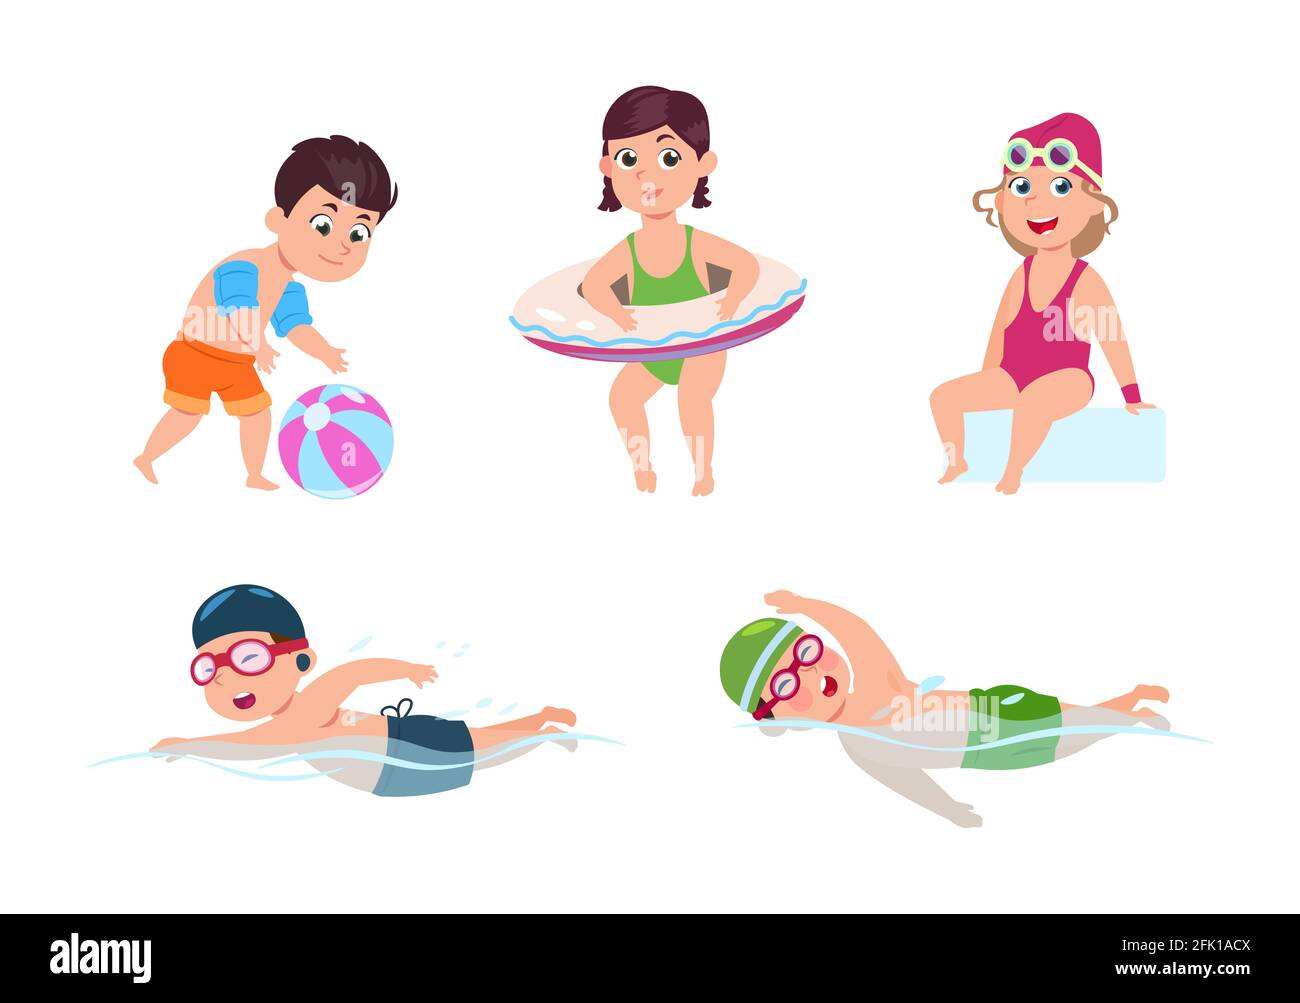 Girl at swimming pool Cut Out Stock Images & Pictures - Alamy